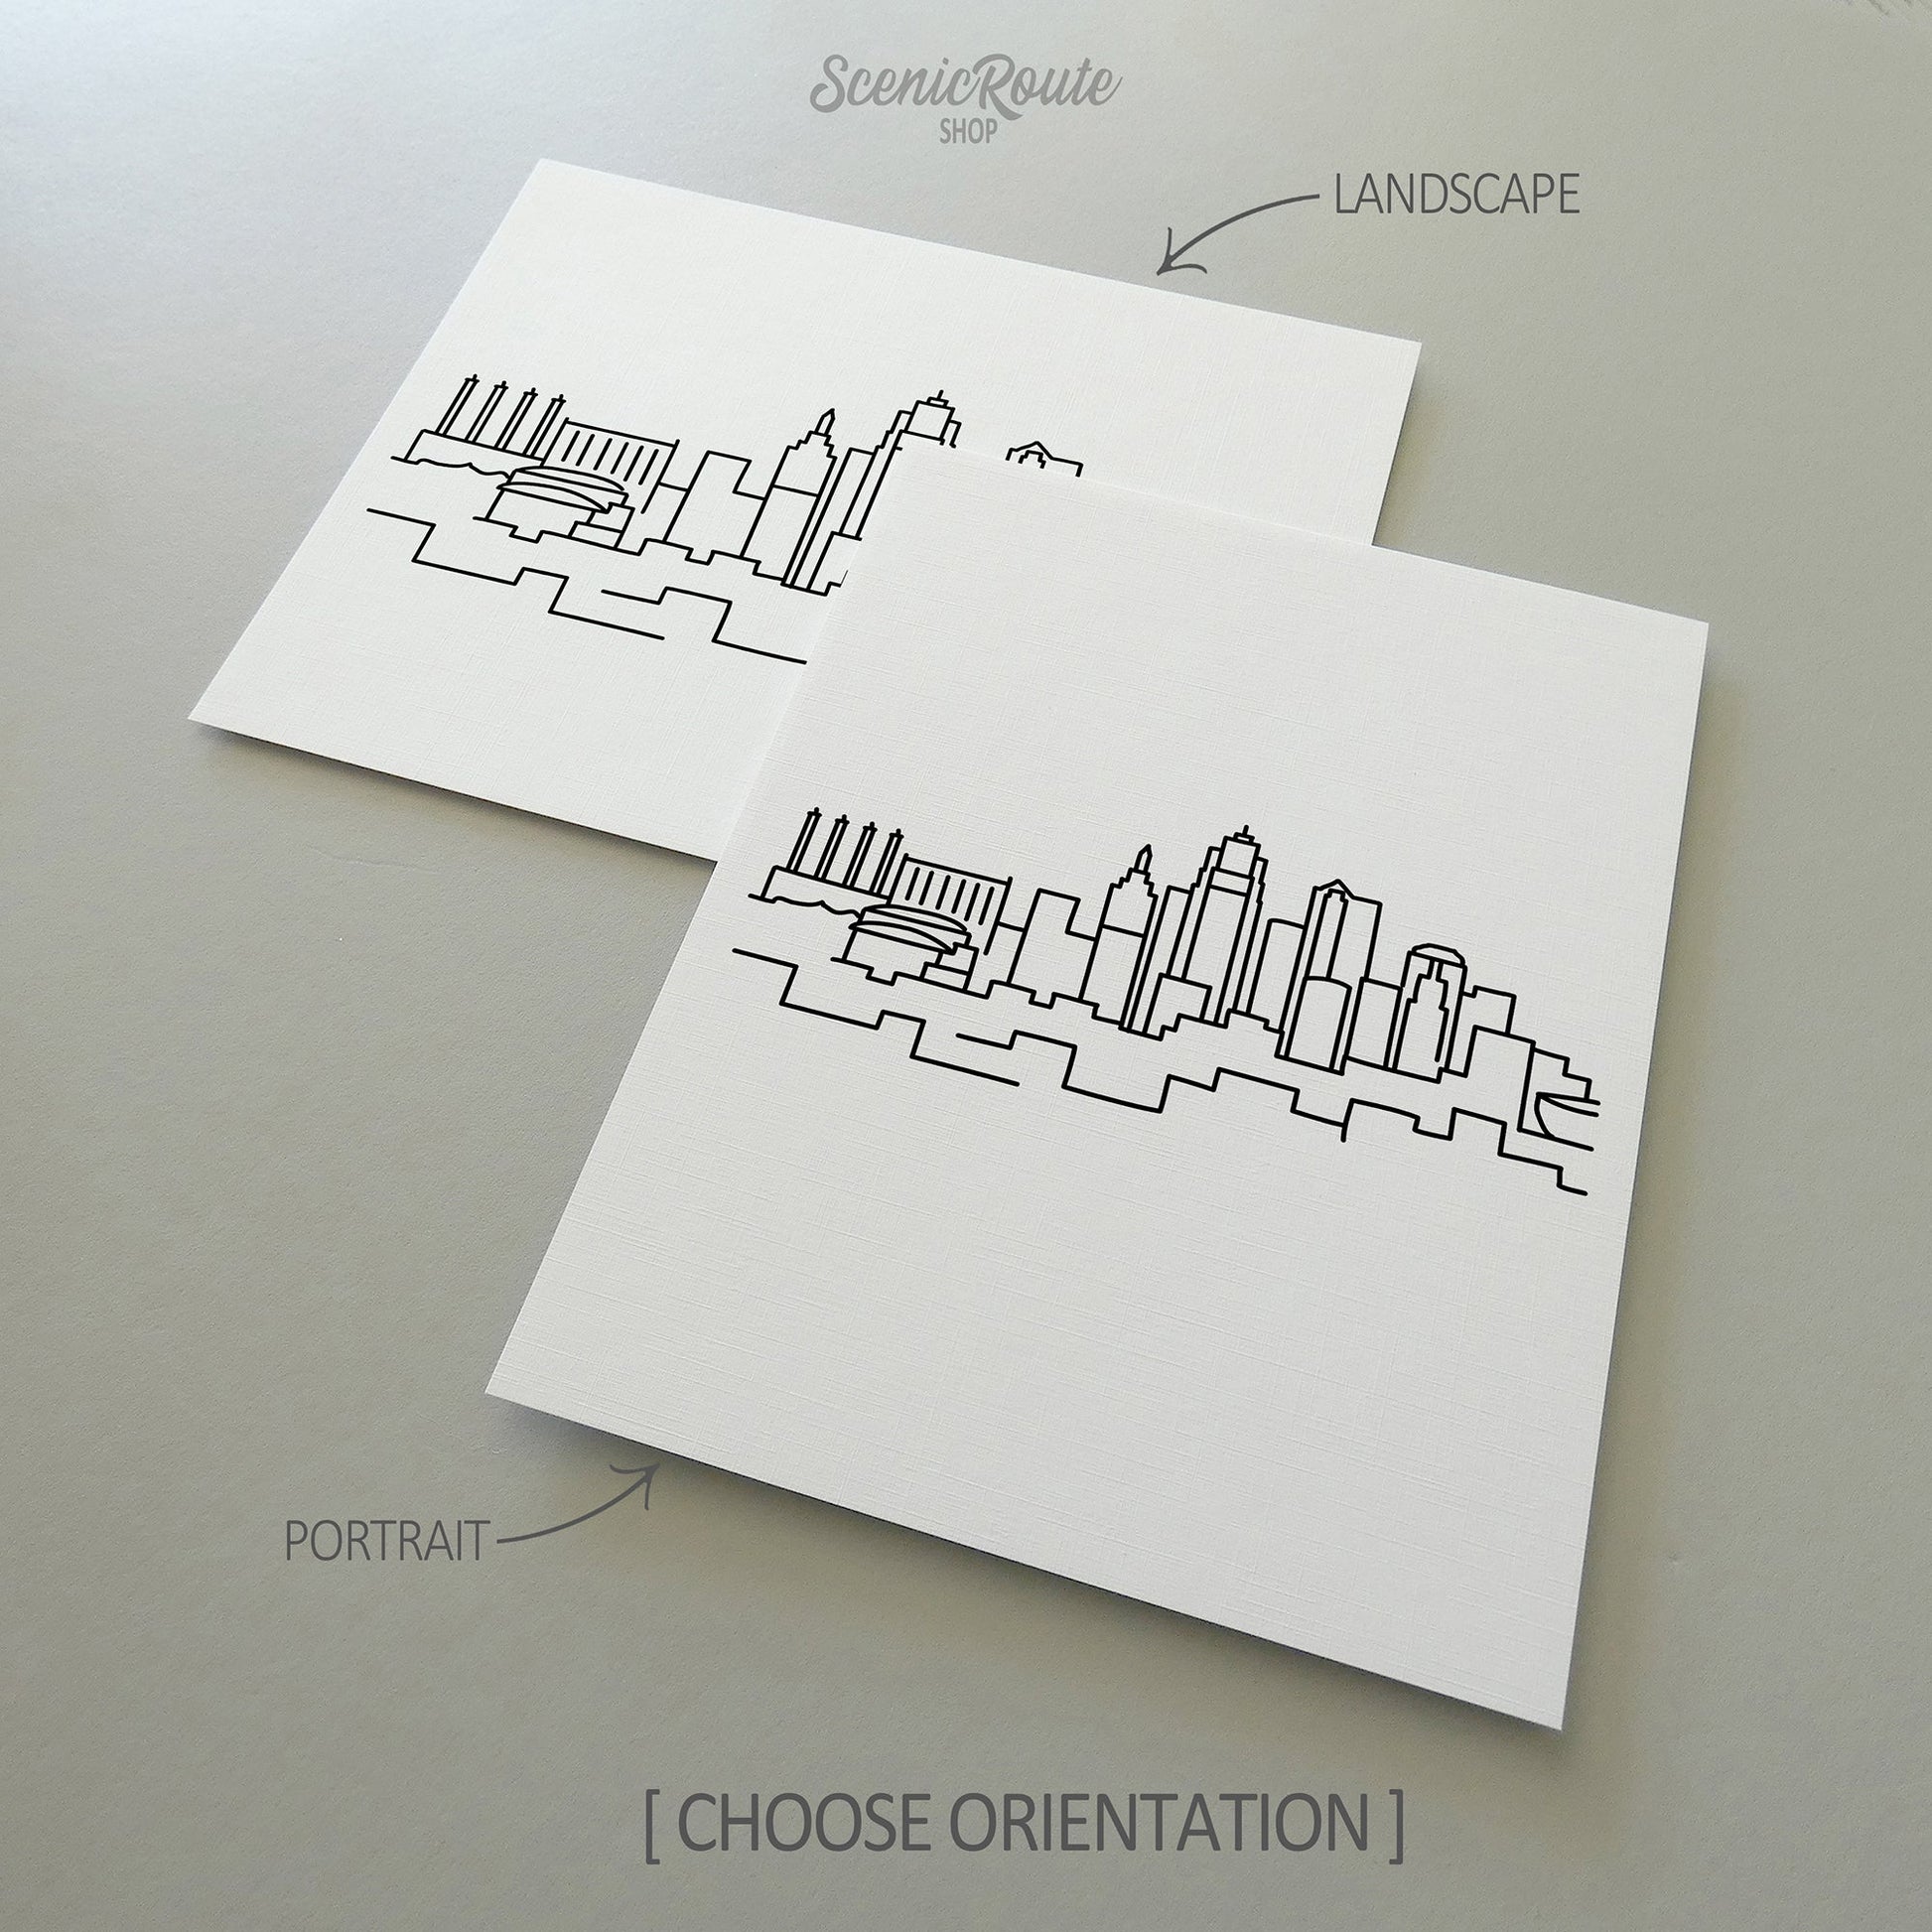 Two line art drawings of the Kansas City Skyline on white linen paper with a gray background.  The pieces are shown in portrait and landscape orientation for the available art print options.